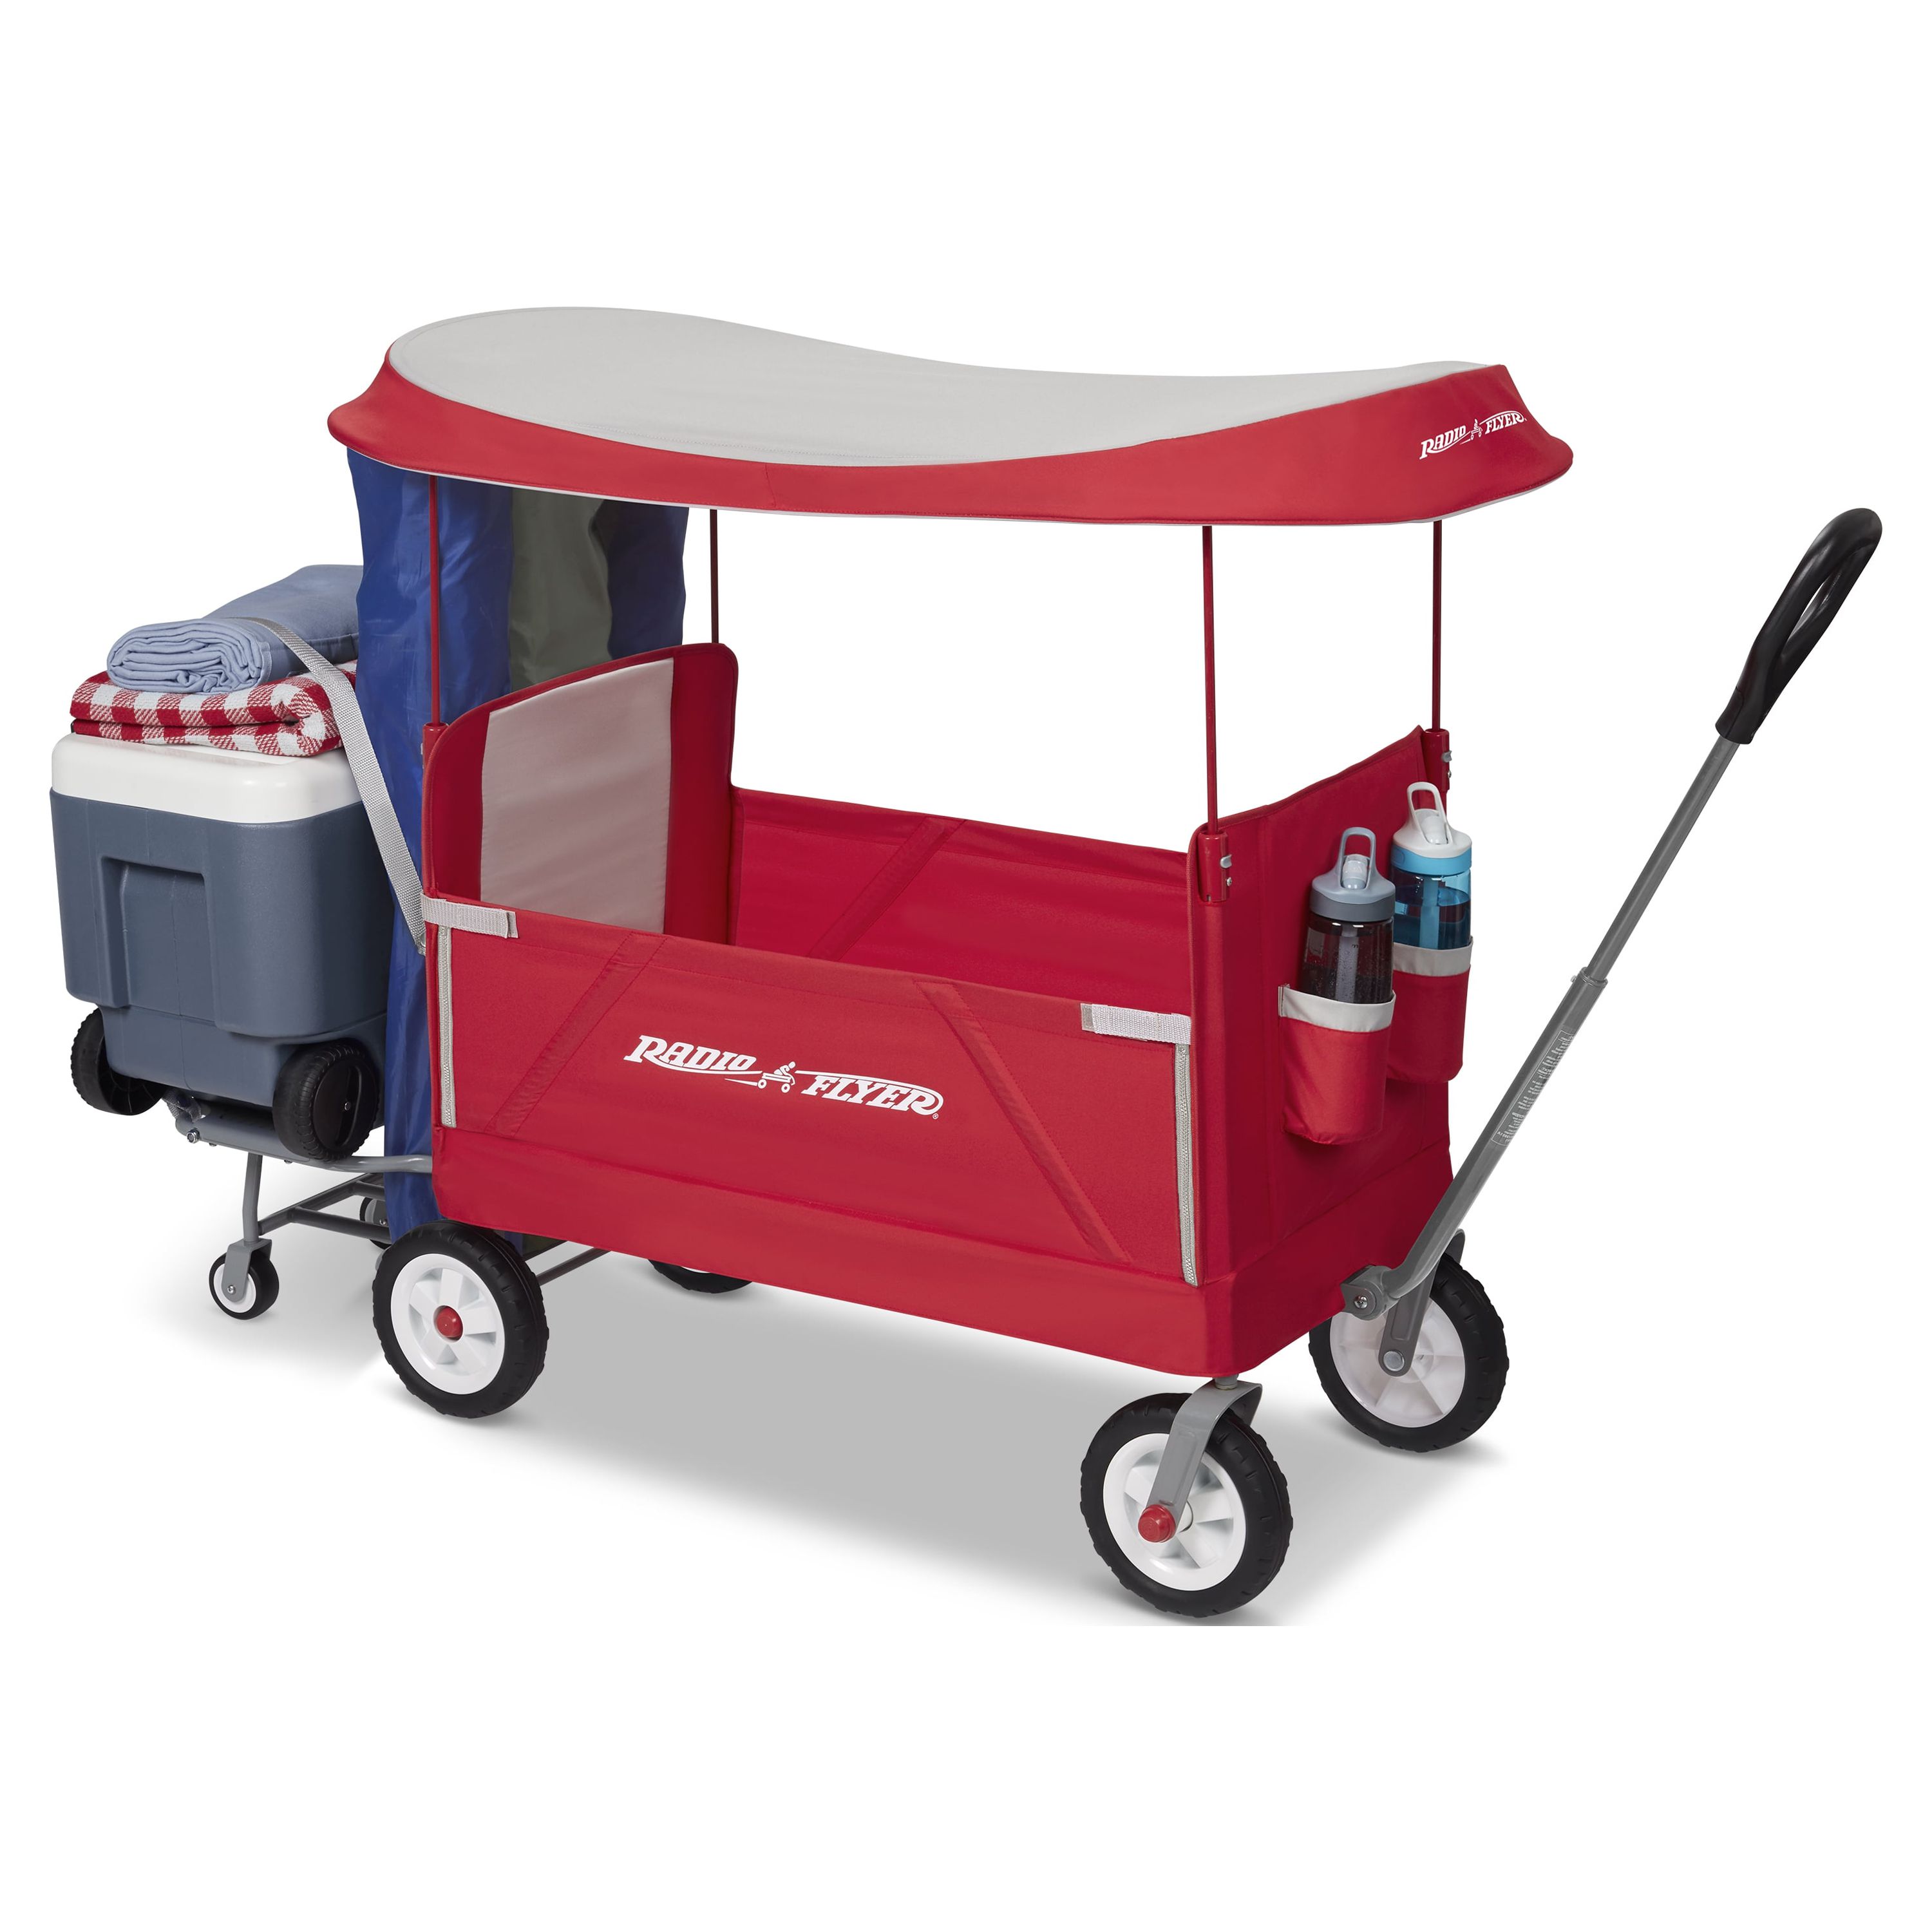 Radio Flyer, 3-in-1 Tailgater Wagon with Canopy, Folding Wagon, Red - image 1 of 20